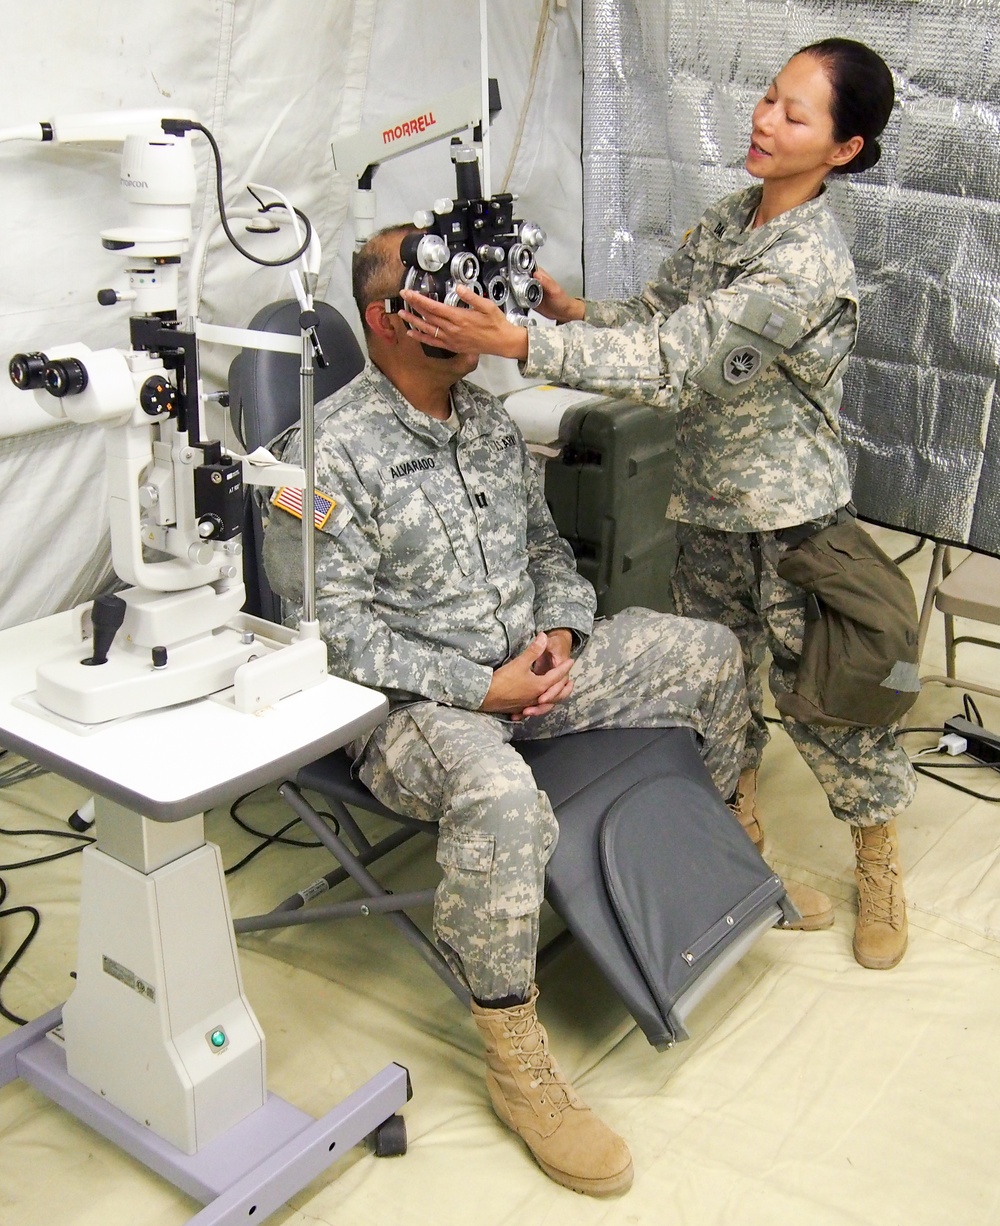 U.S. Army Reserve Soldier Capt. Amy Dao with 315th Optometry Medical Detachment, based in Fort Dix, N.J, prepares for an eye exam during Global Medic CSTX 91-18-01, at Fort Hunter Liggett, California, July 21, 2018. CSTX 91-18-01